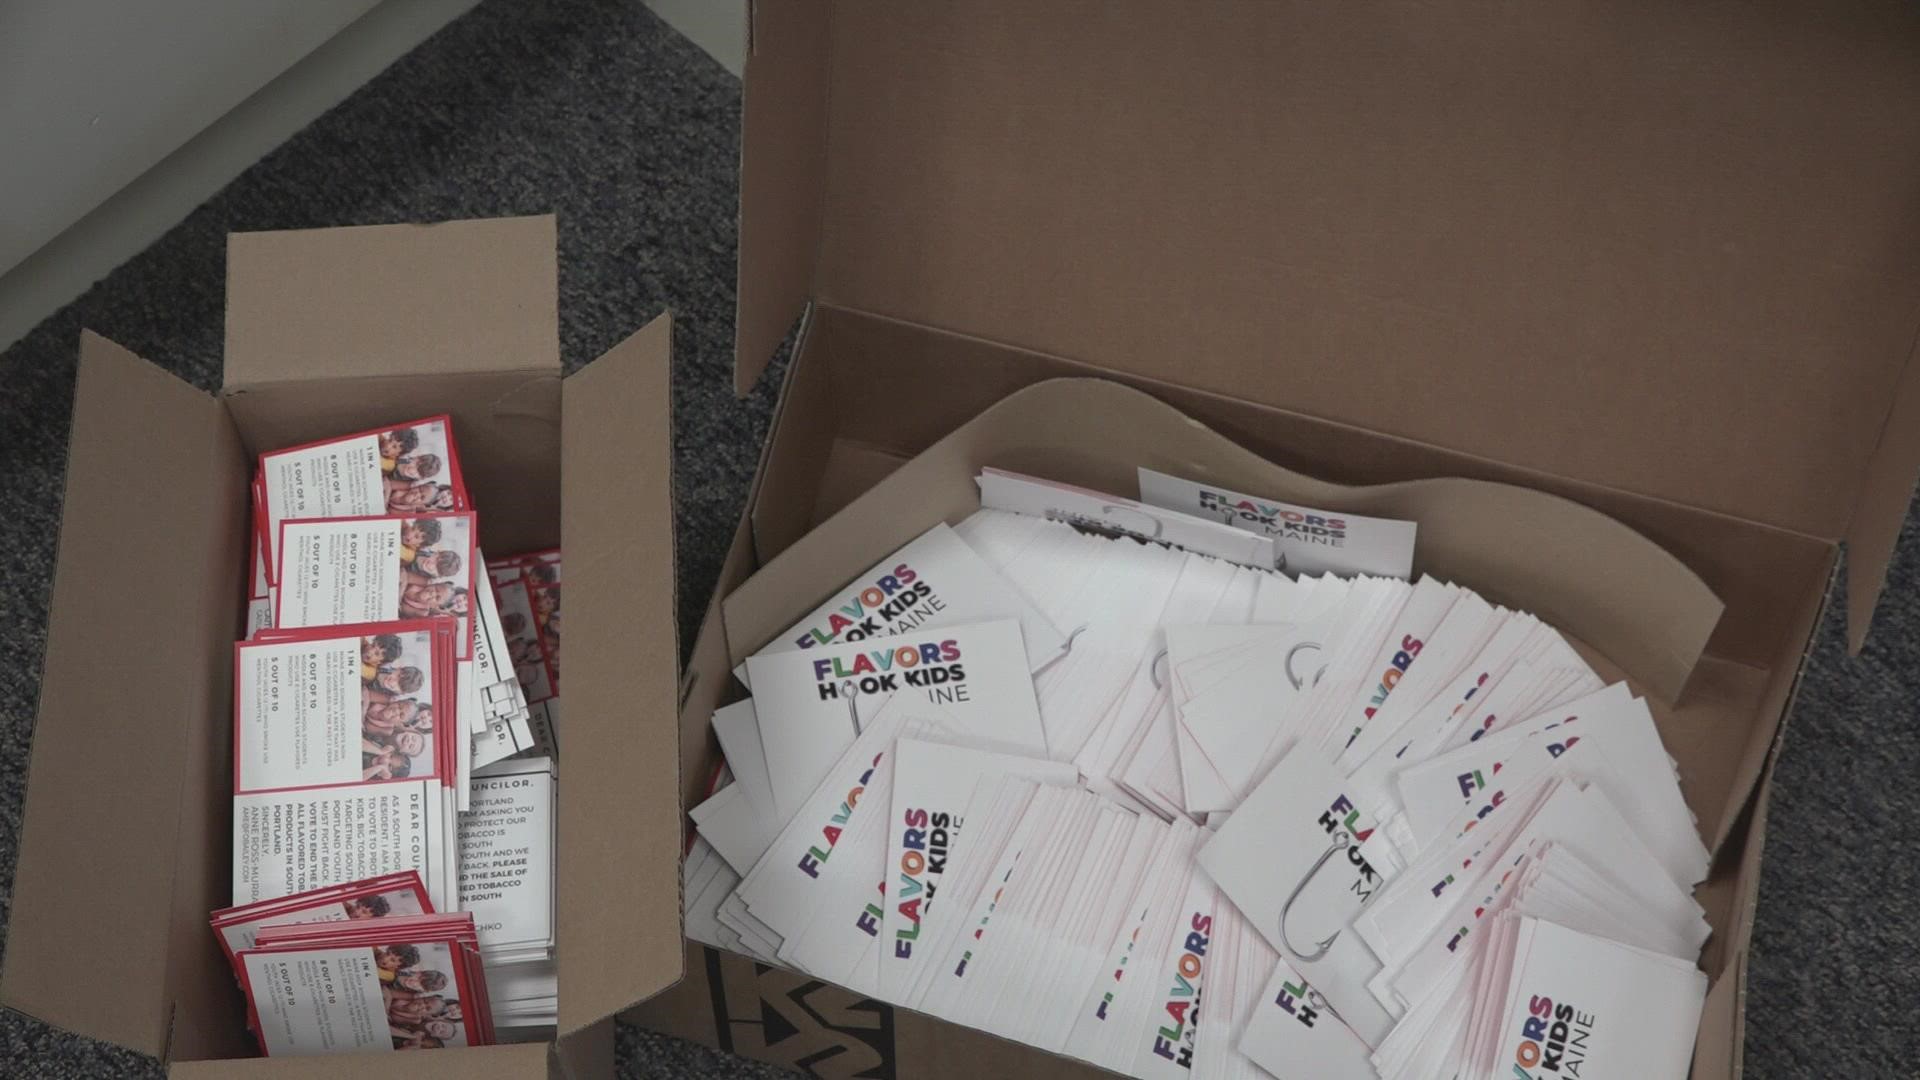 Supporters of the ban dropped off 900 postcards at South Portland City Hall on Tuesday, urging city councilors to vote to end the sale of flavored tobacco products.